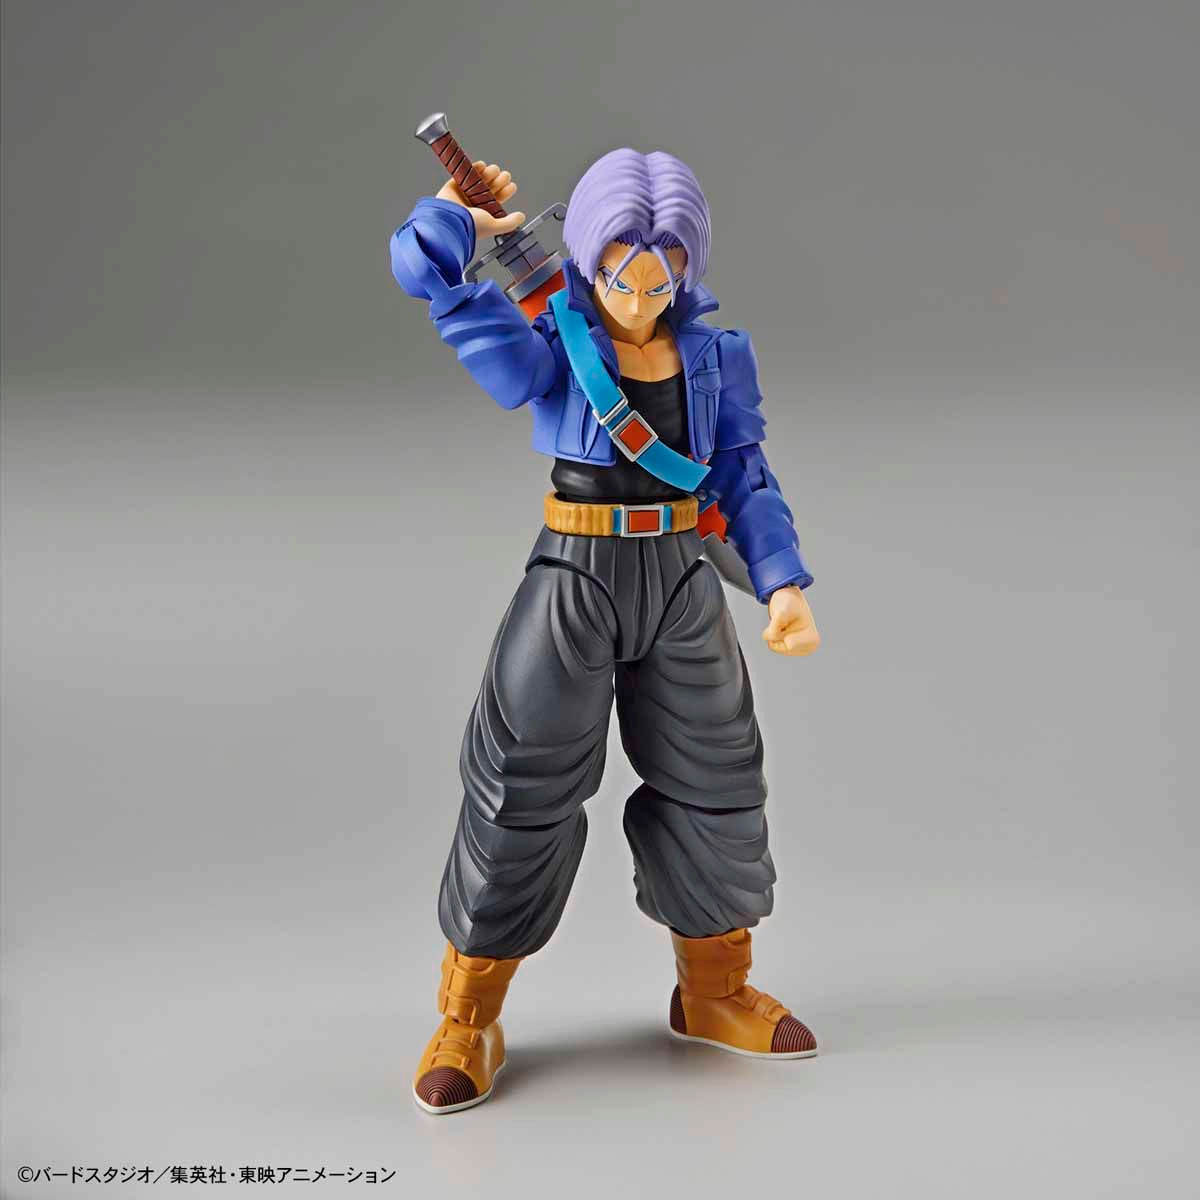 Dragon Ball - Super Saiyan Trunks - Figure-rise Standard Model Kit, Includes two head parts for Trunks in normal and Super Saiyan states, effect parts for Burning Attack and Shining Slash, iconic sword, and various hand parts. Compatible with Figure-rise Mechanics Trunks' Time Machine. From Bandai. Available at Nippon Figures.